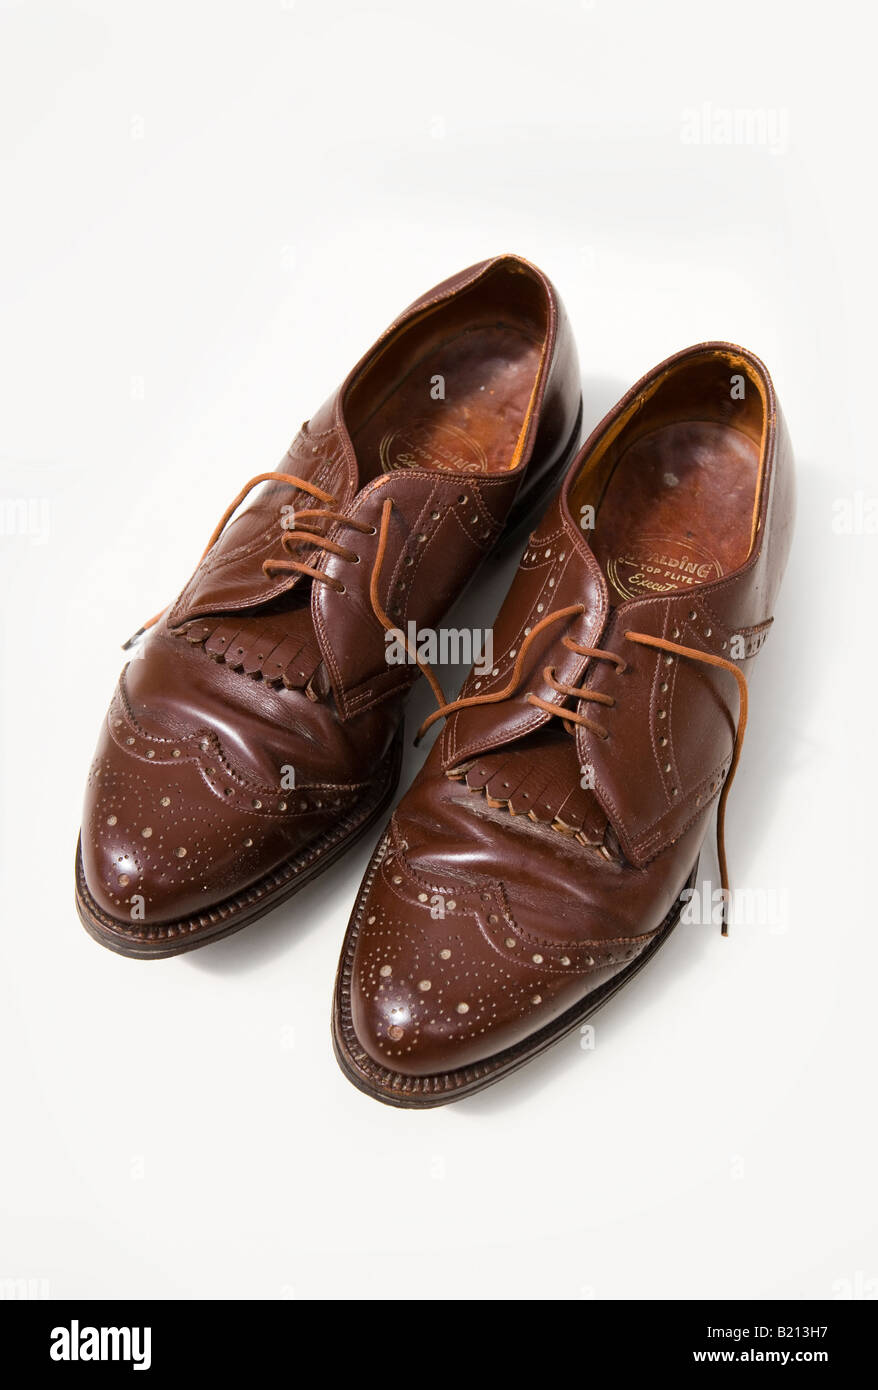 Vintage Style Leather Shoes Old Leather Stock Photo 716018521